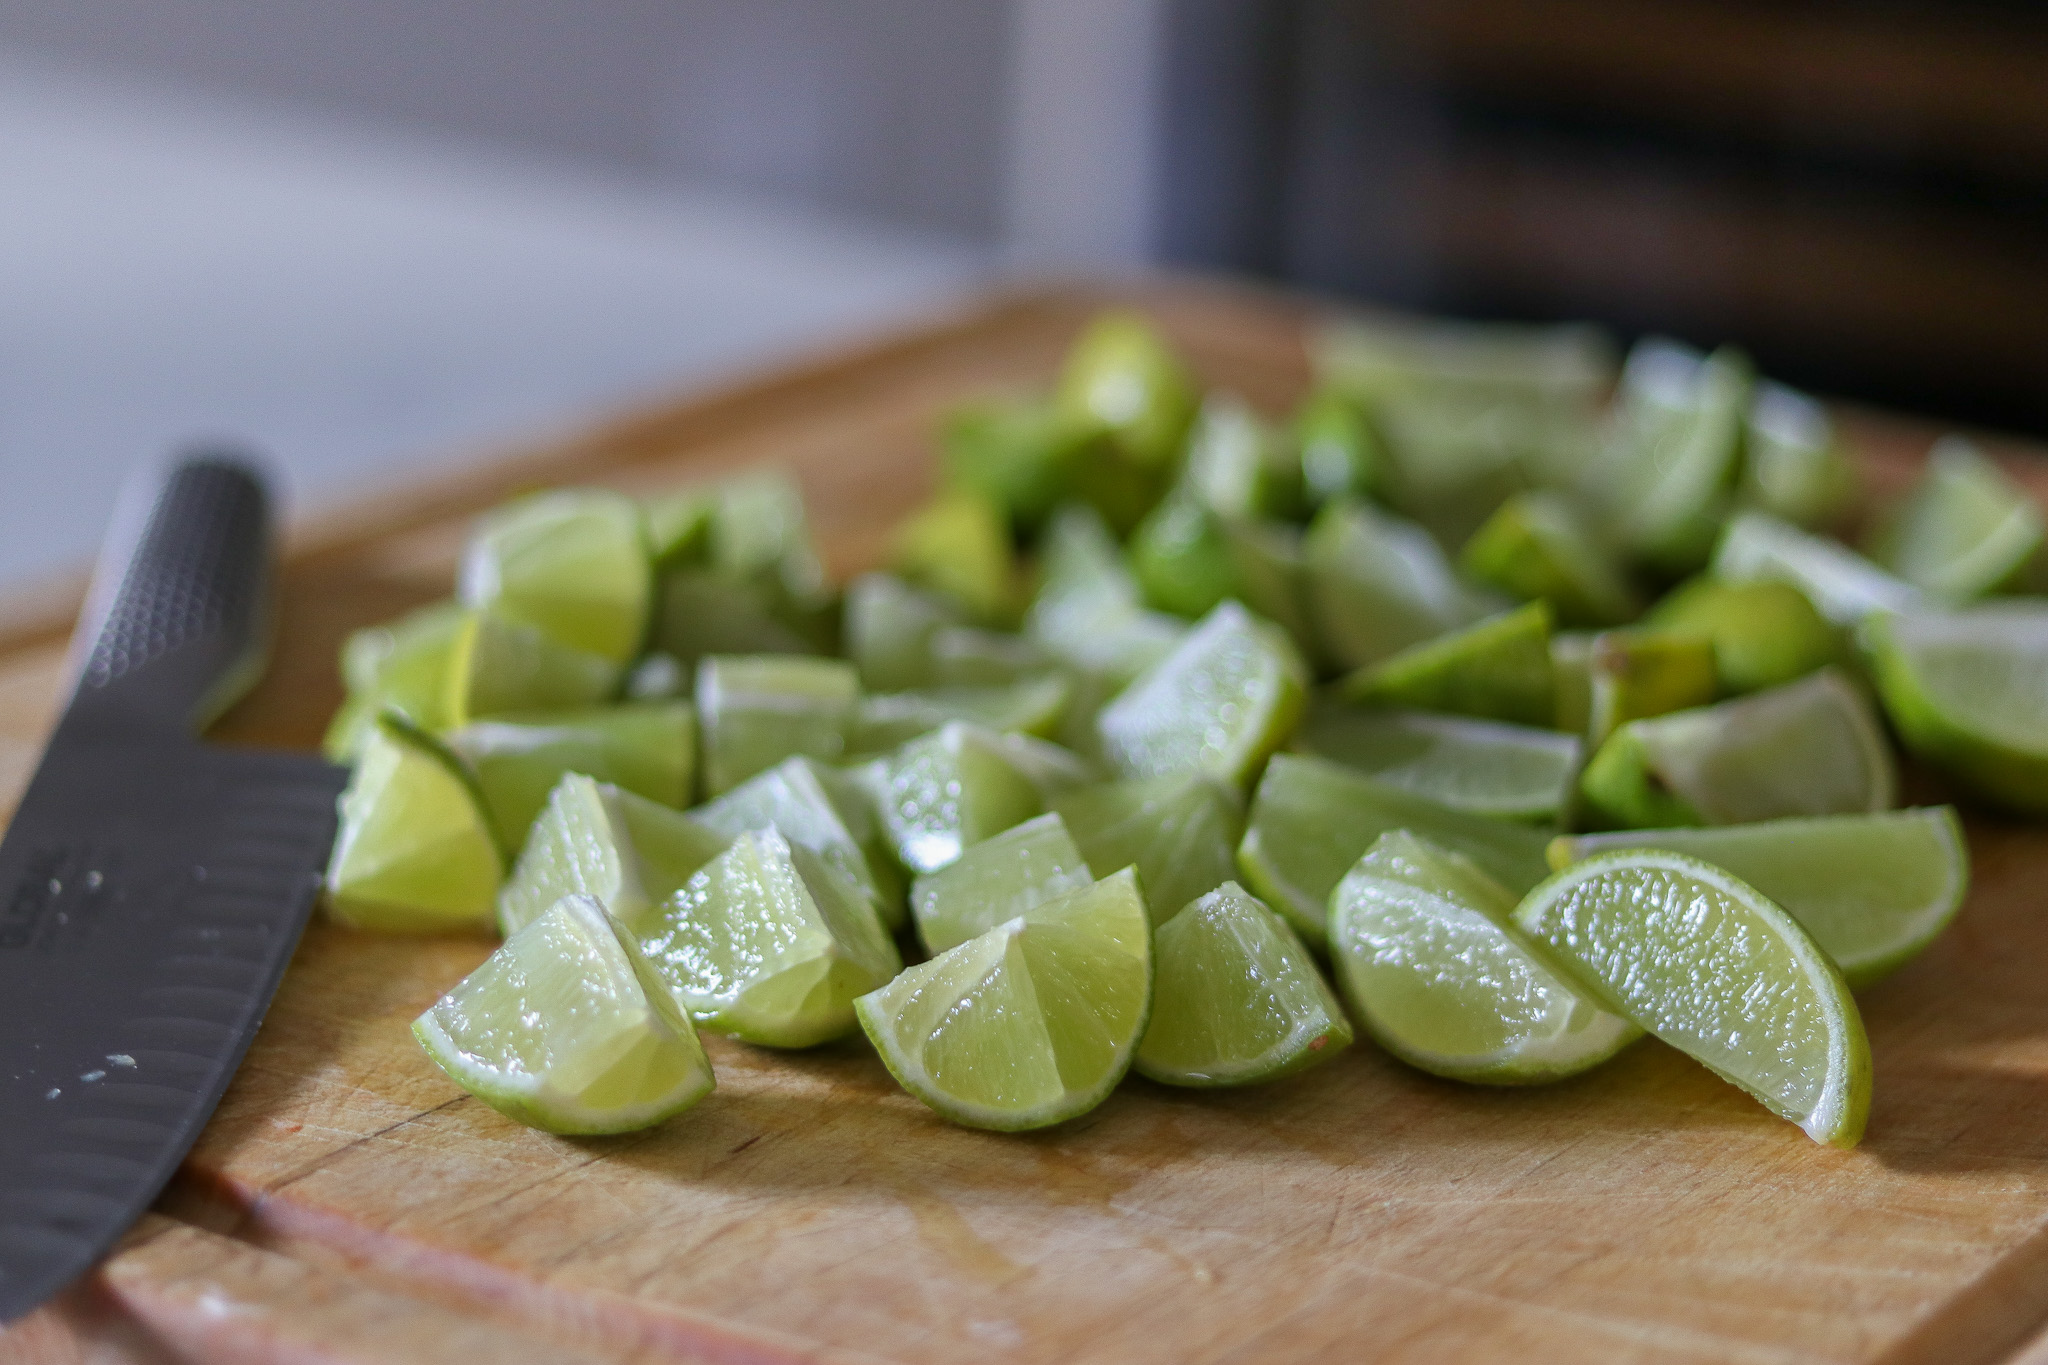 Chopping Limes for Marmalade